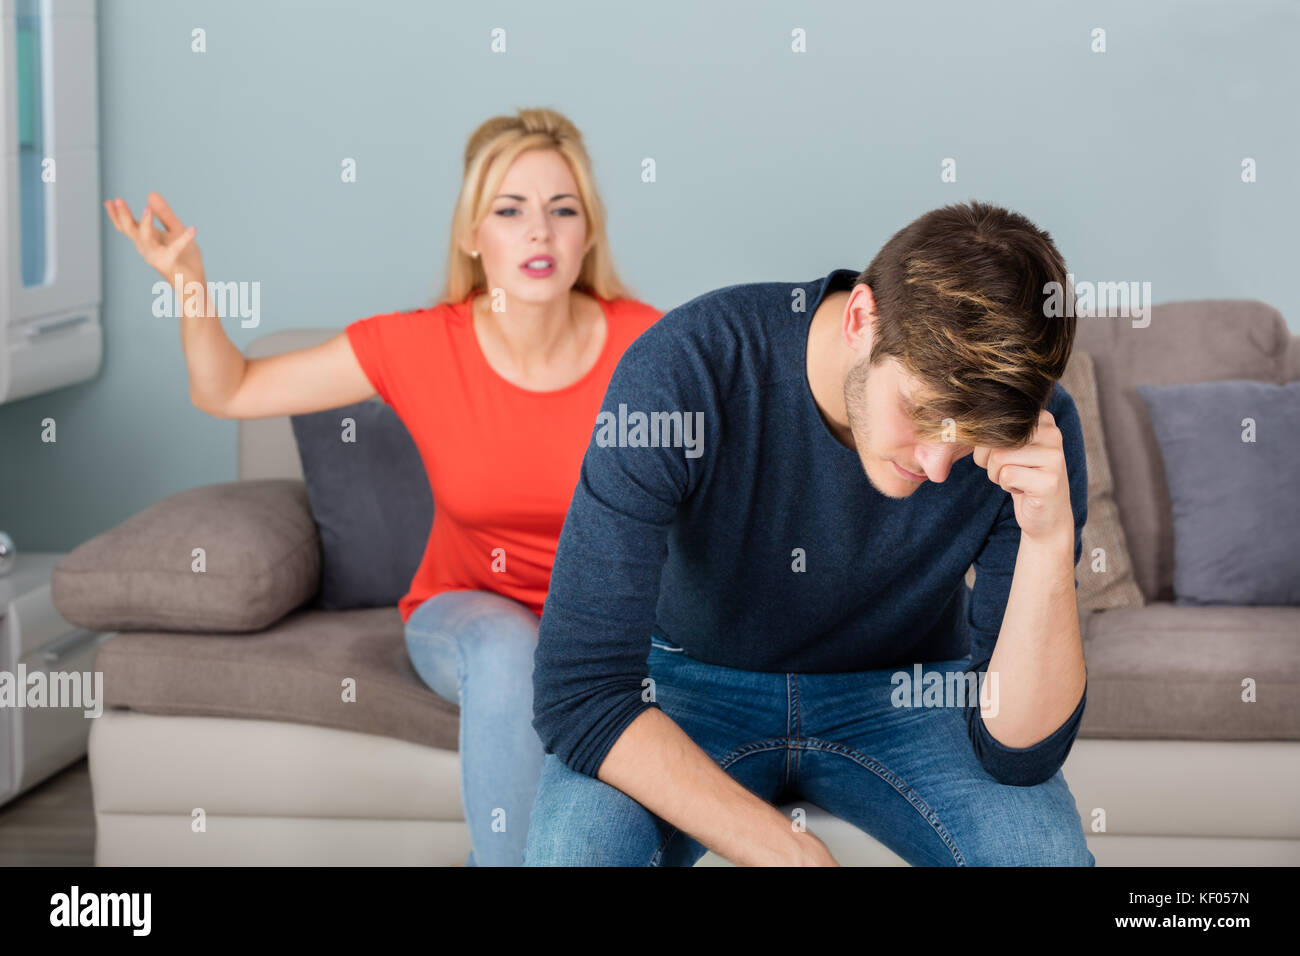 Depressed Divorcing Woman Sitting On Couch Having Argument With Man About Infidelity At Home Stock Photo